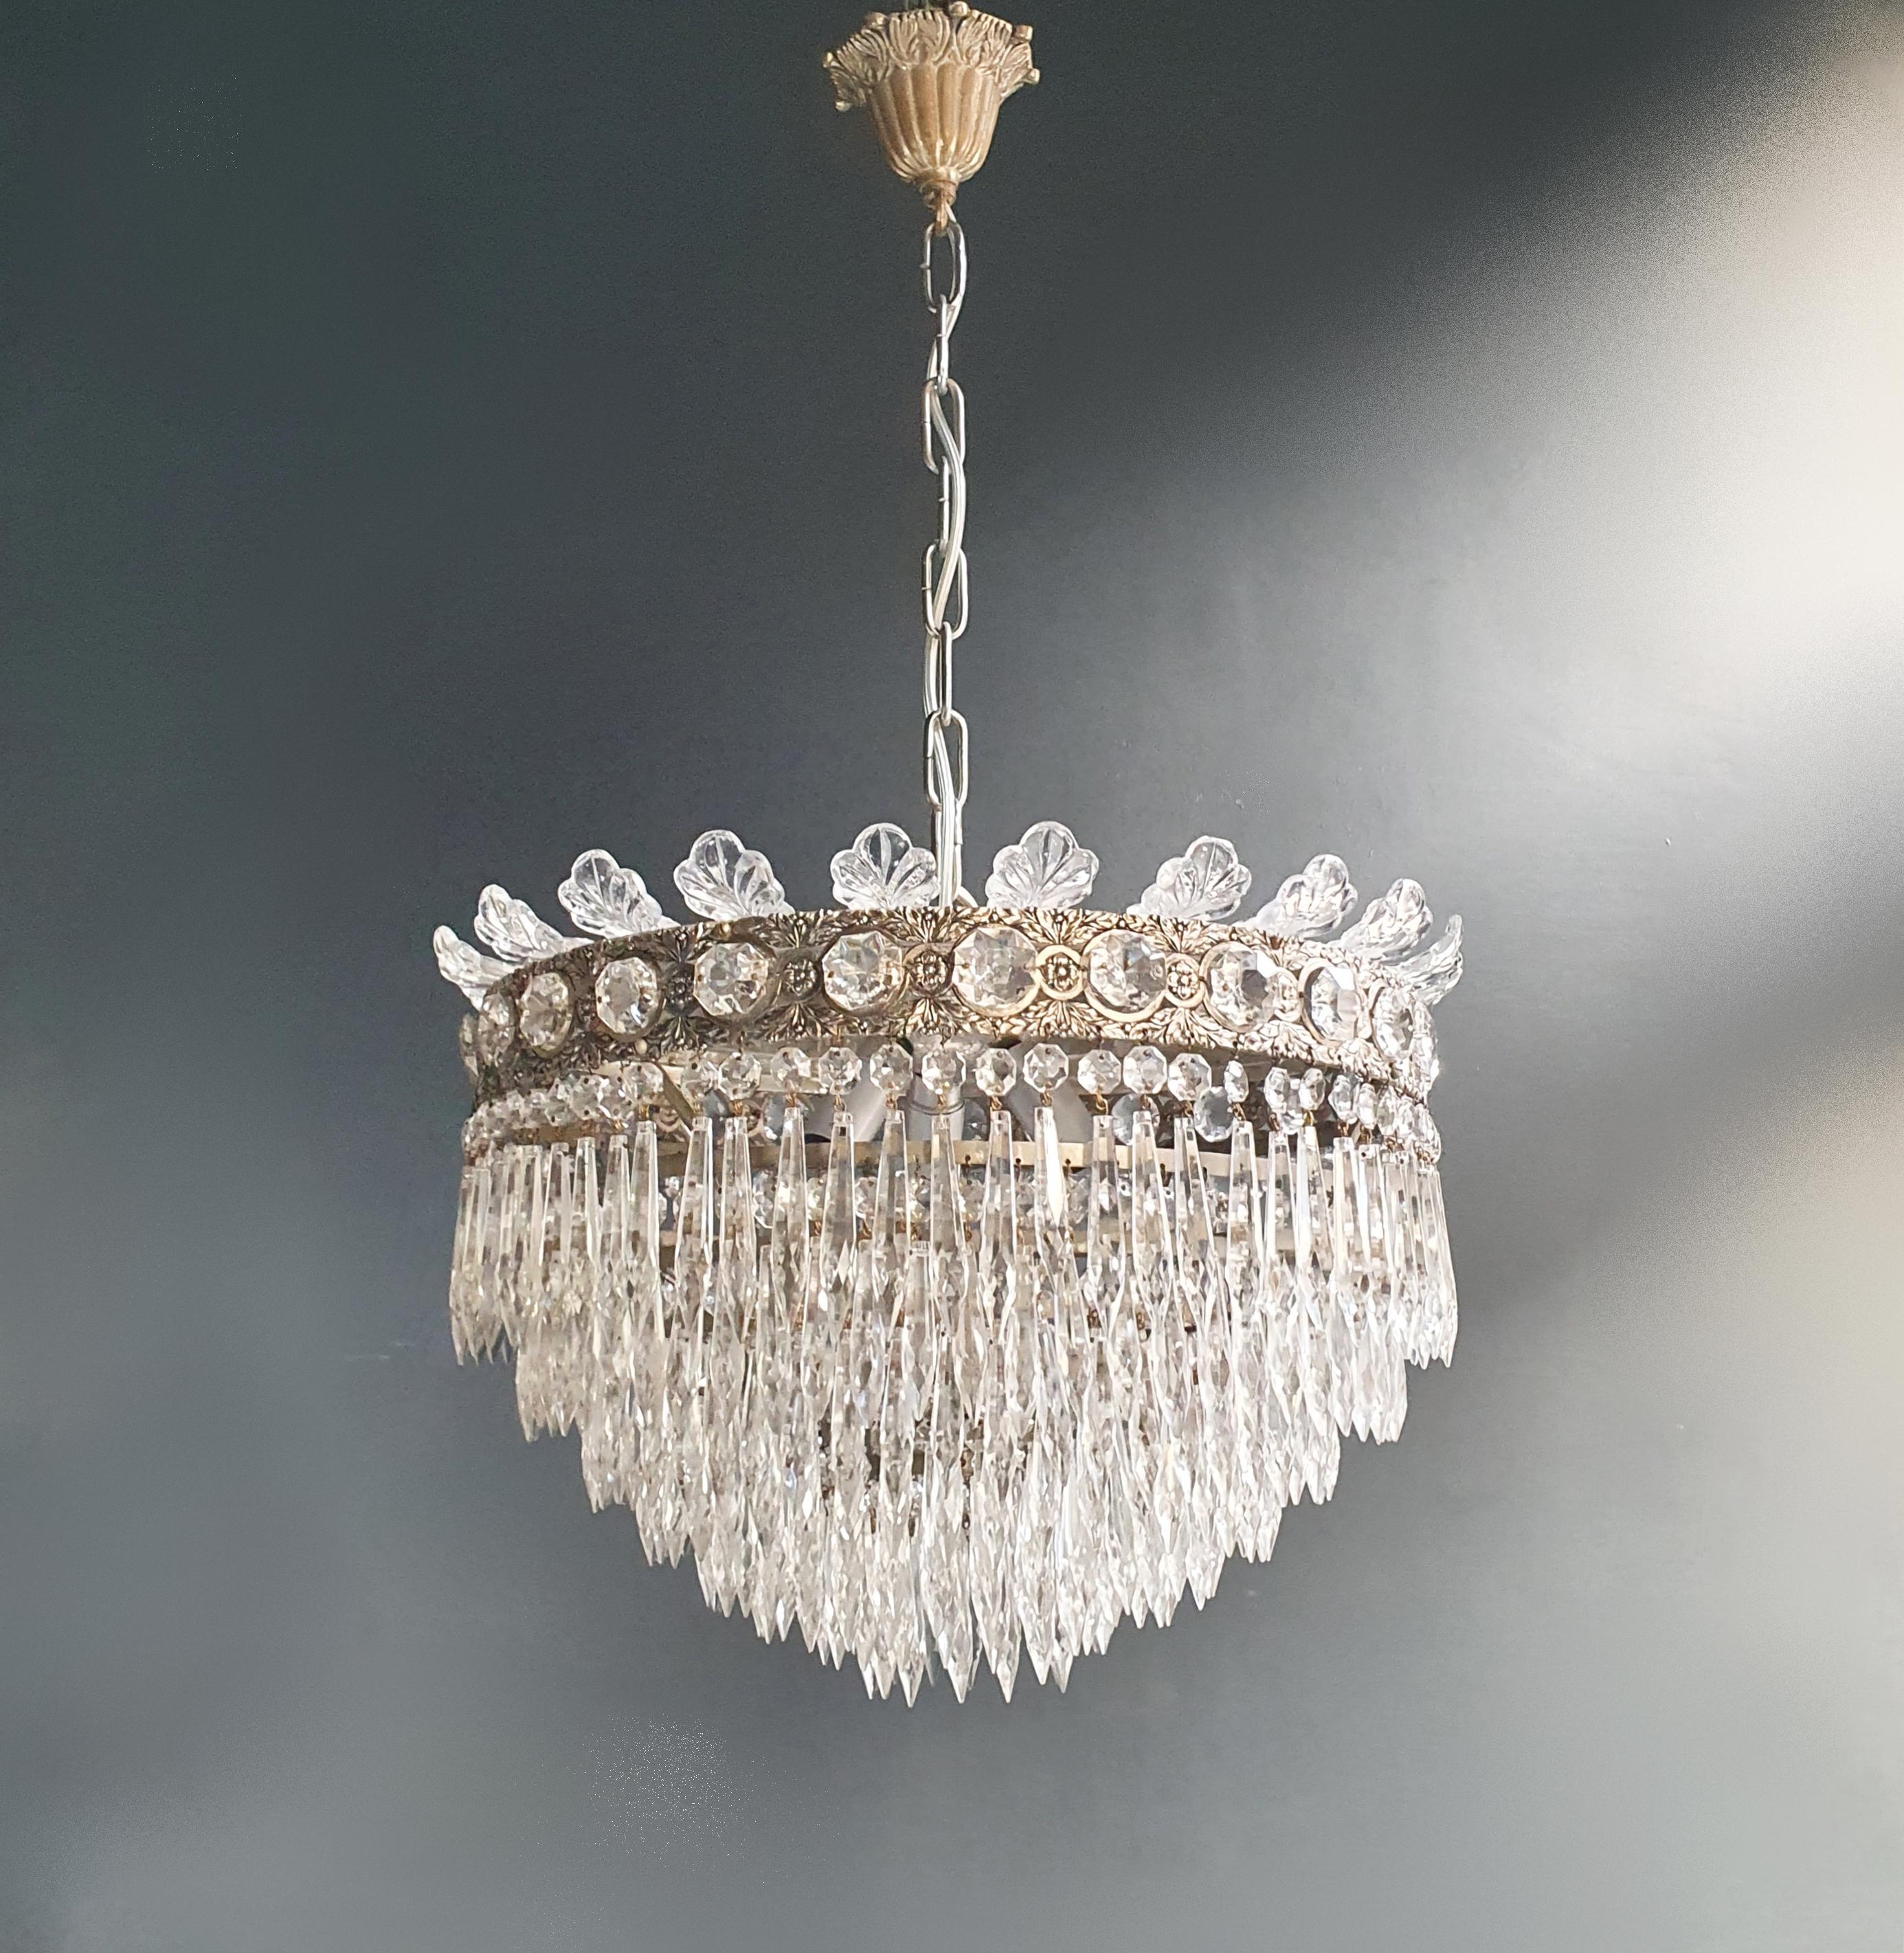 old chandelier with love and professionally restored in Berlin. electrical wiring works in the US.
Re-wired and ready to hang
not one missing
Cabling completely renewed. Crystal, hand-knotted.
Measures: Total height 75 cm, height without chain 33